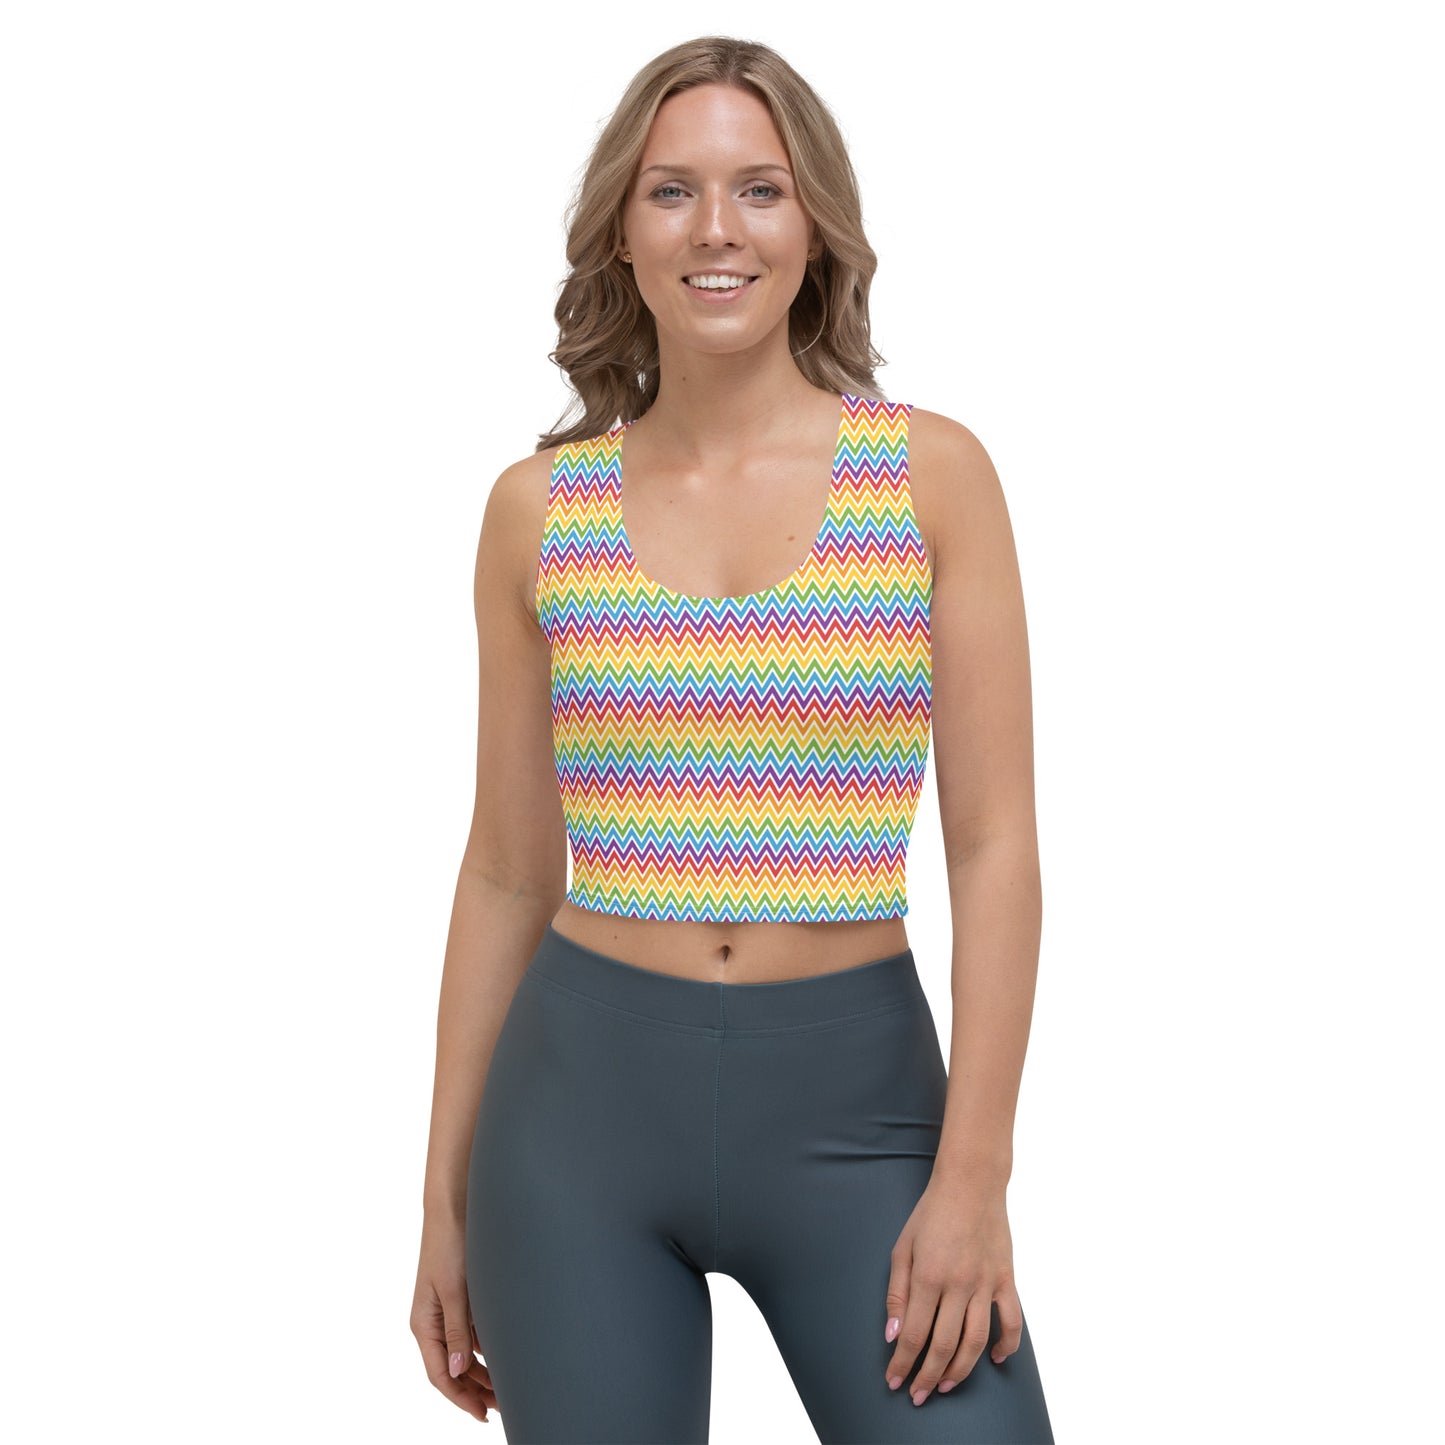 Rainbow Pride Crop Top Fitted Crop Tank Top - LGBTQIA Red, Orange, Yellow, Green, Blue, Indigo, and Viole Flag Cropped T-Shirt - Parade Club Vacation